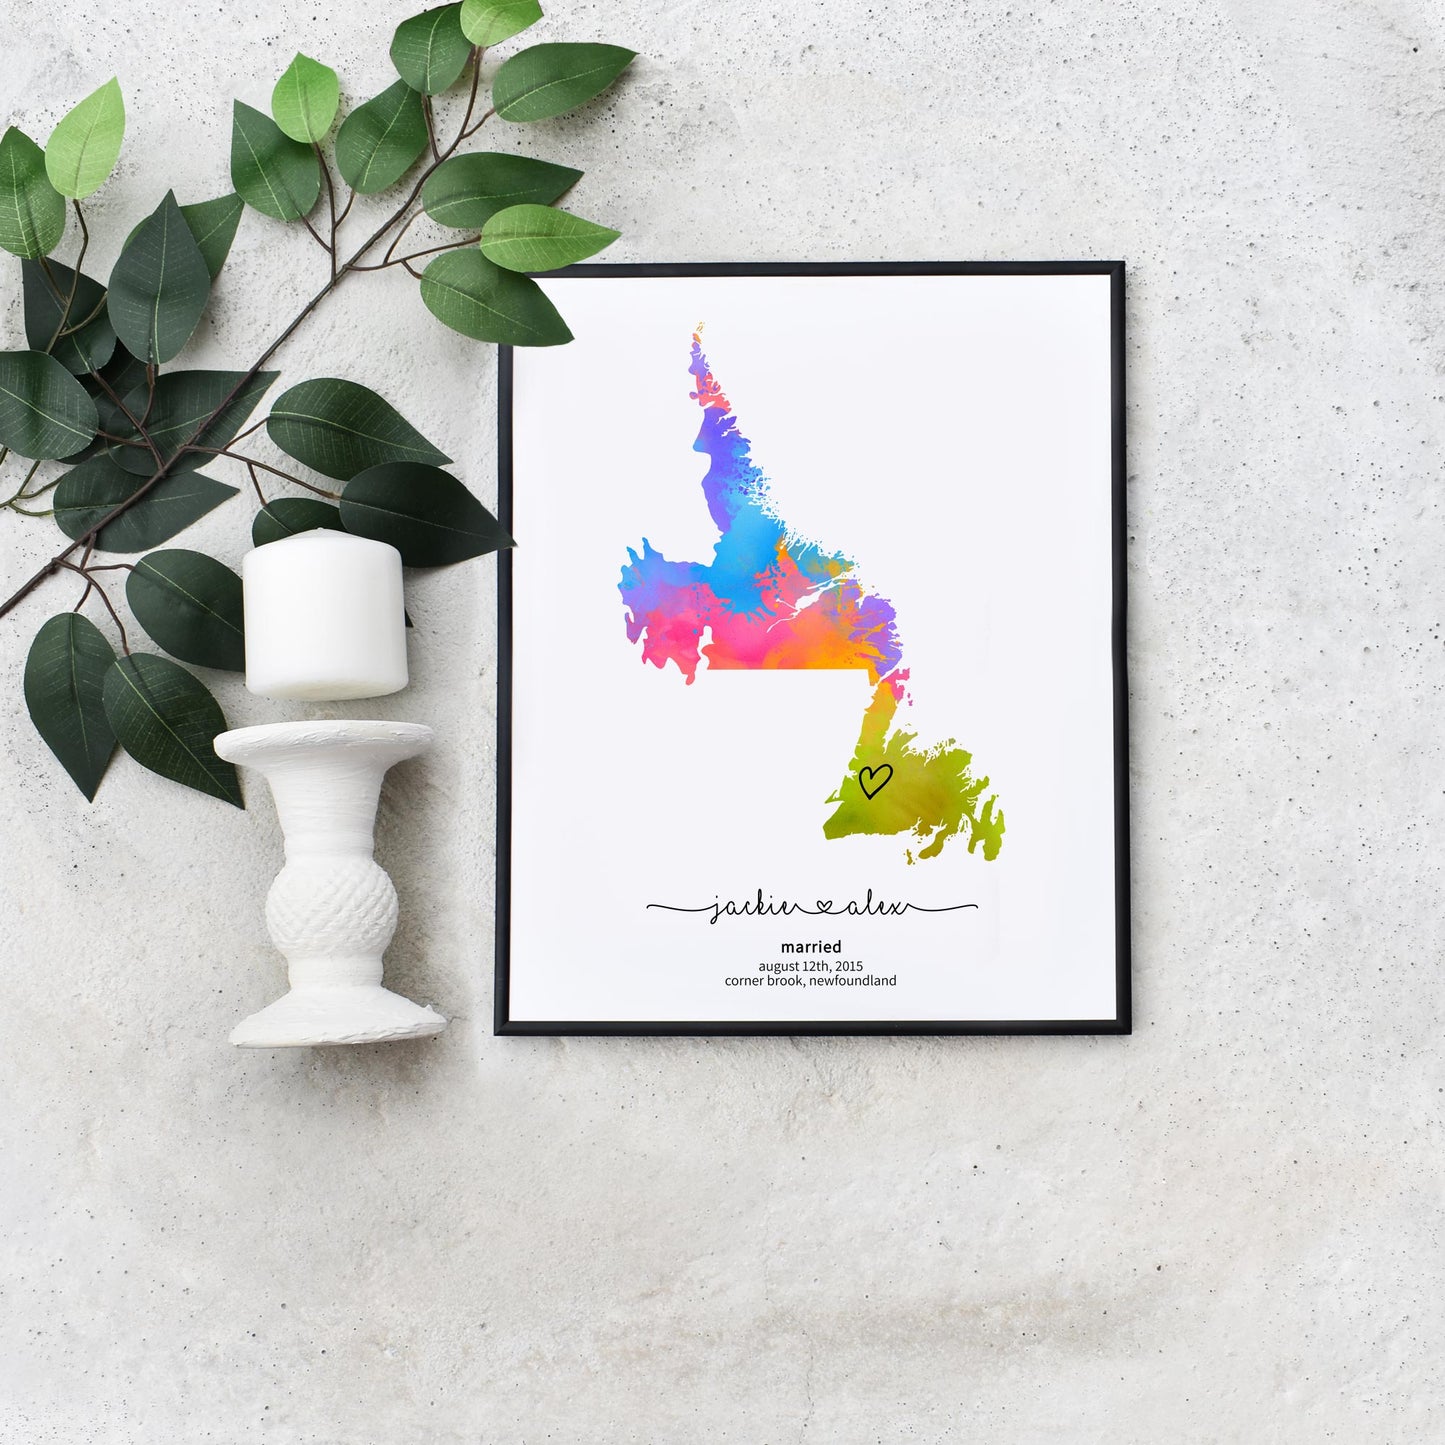 Quick Edit Yourself Newfoundland Rainbow Map Last Minute Wedding Gift for Couple